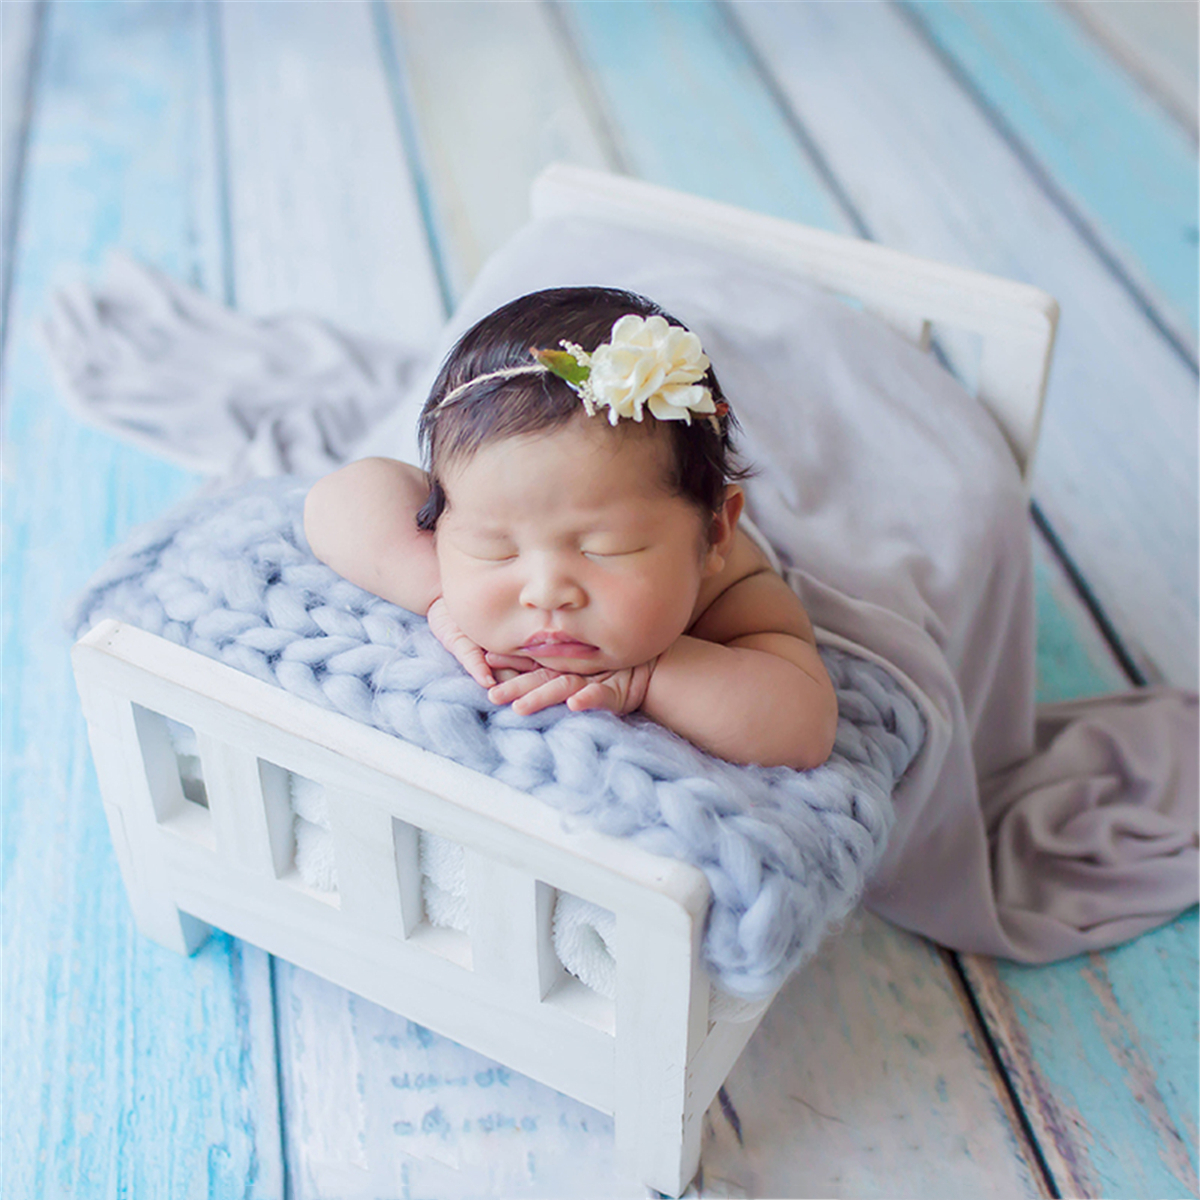 

Newborn Baby Mini Wood Bed Detachable Wooden Photography Photo Prop For Shoot